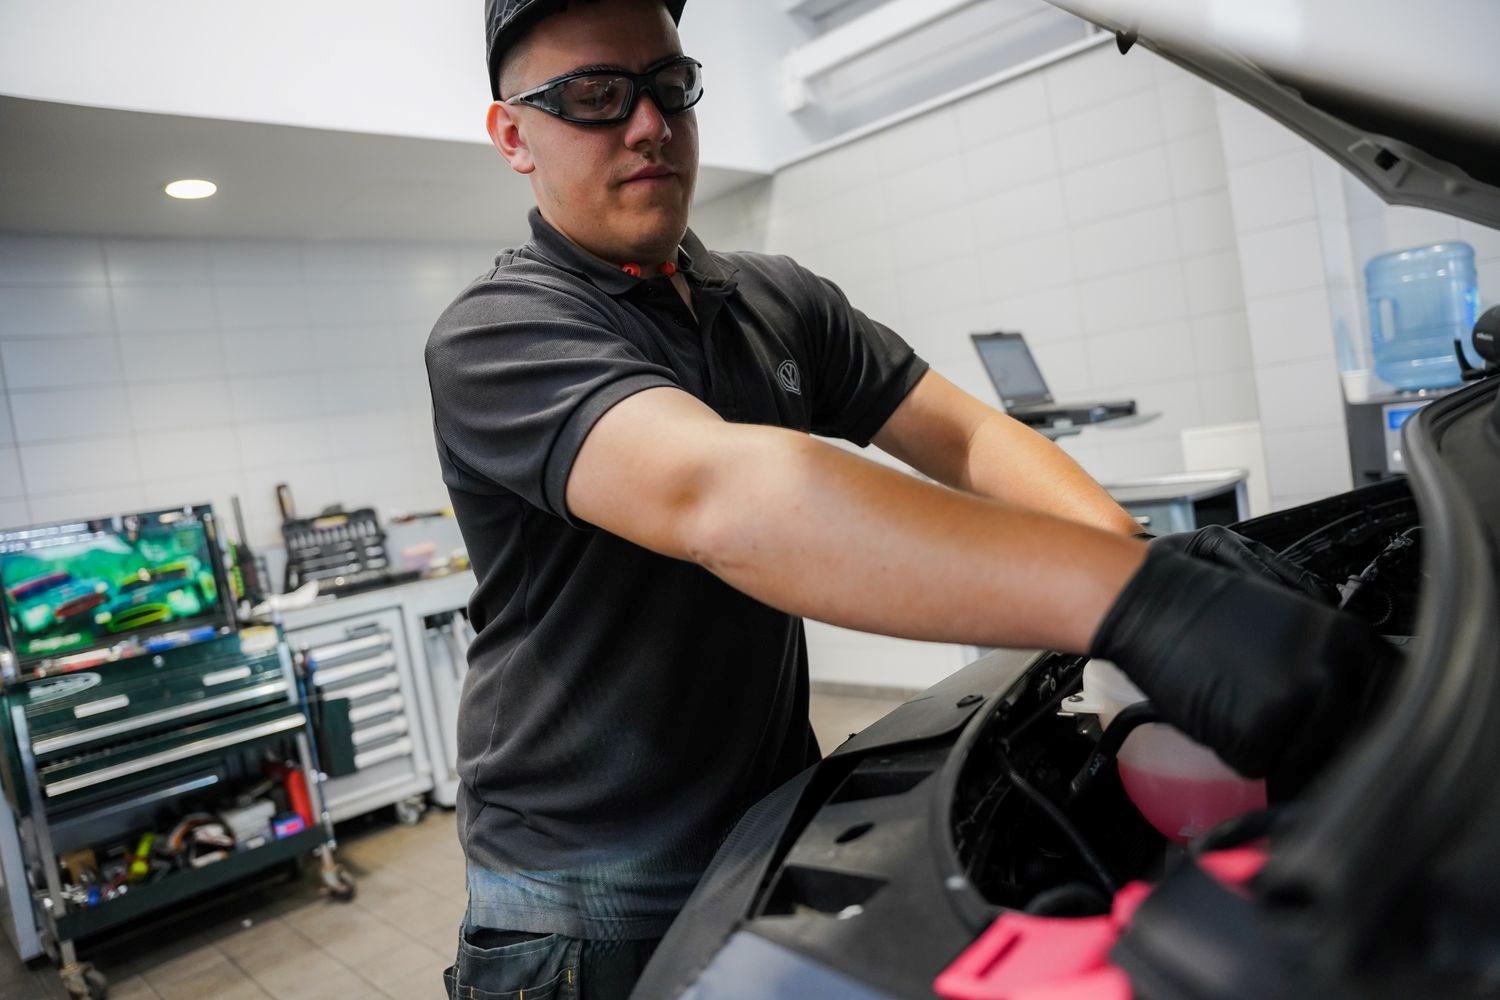 Volkswagen Commercial Vehicle Technician changes coolant on vehicle during maintenance work